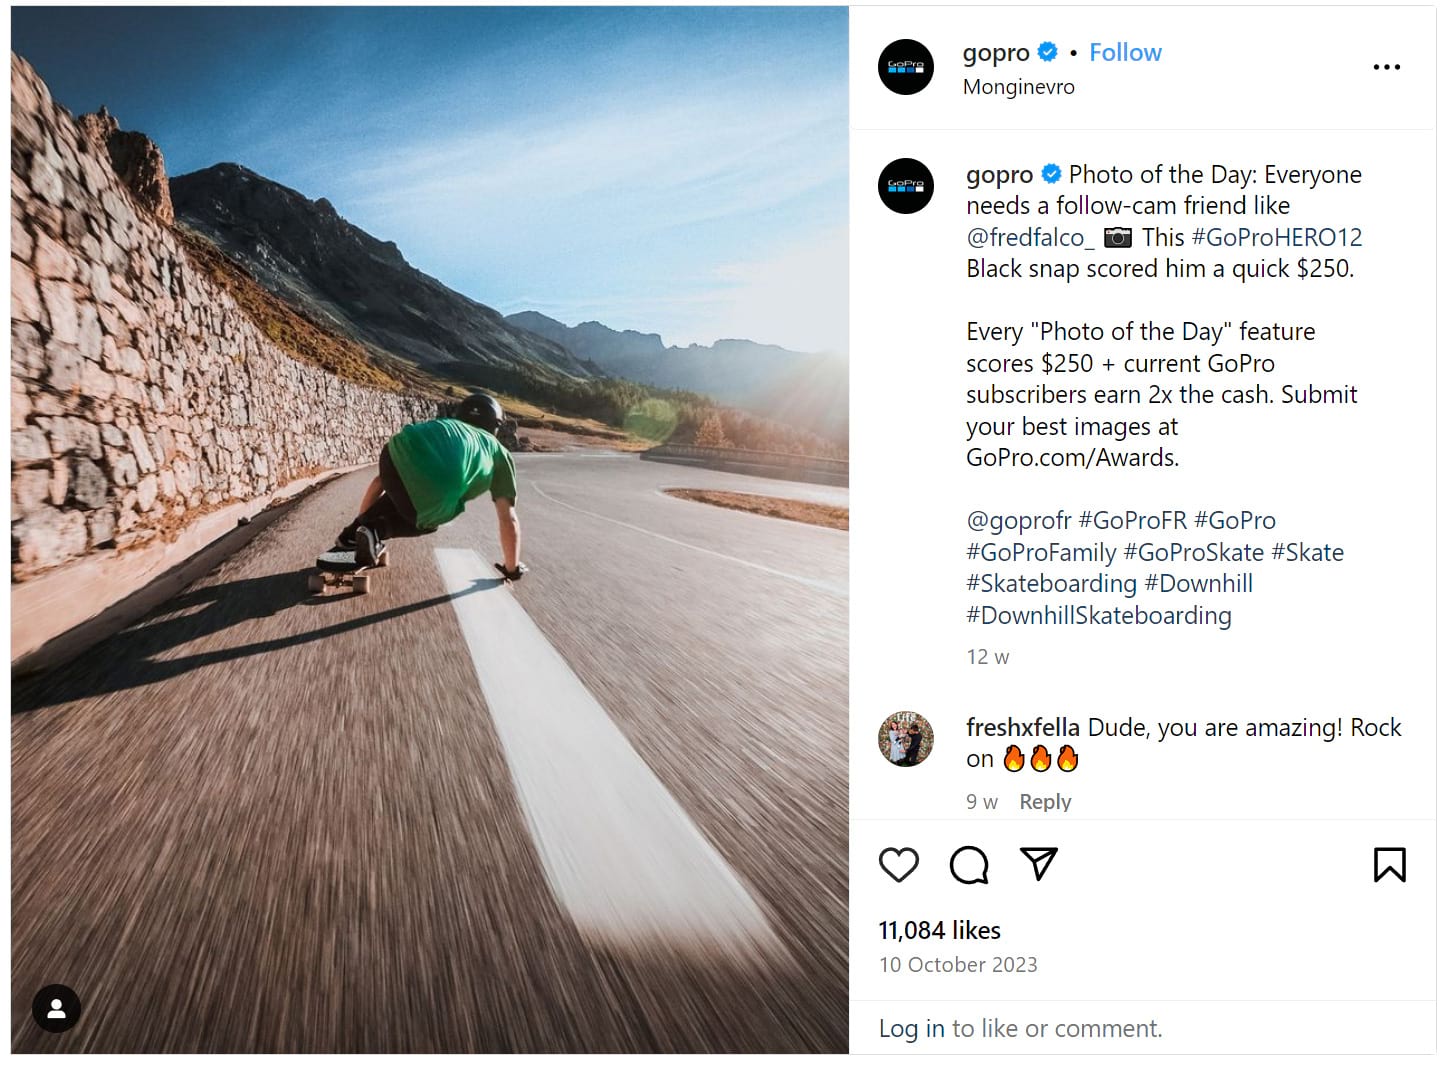 GoPro's post on Instagram with user-generated image